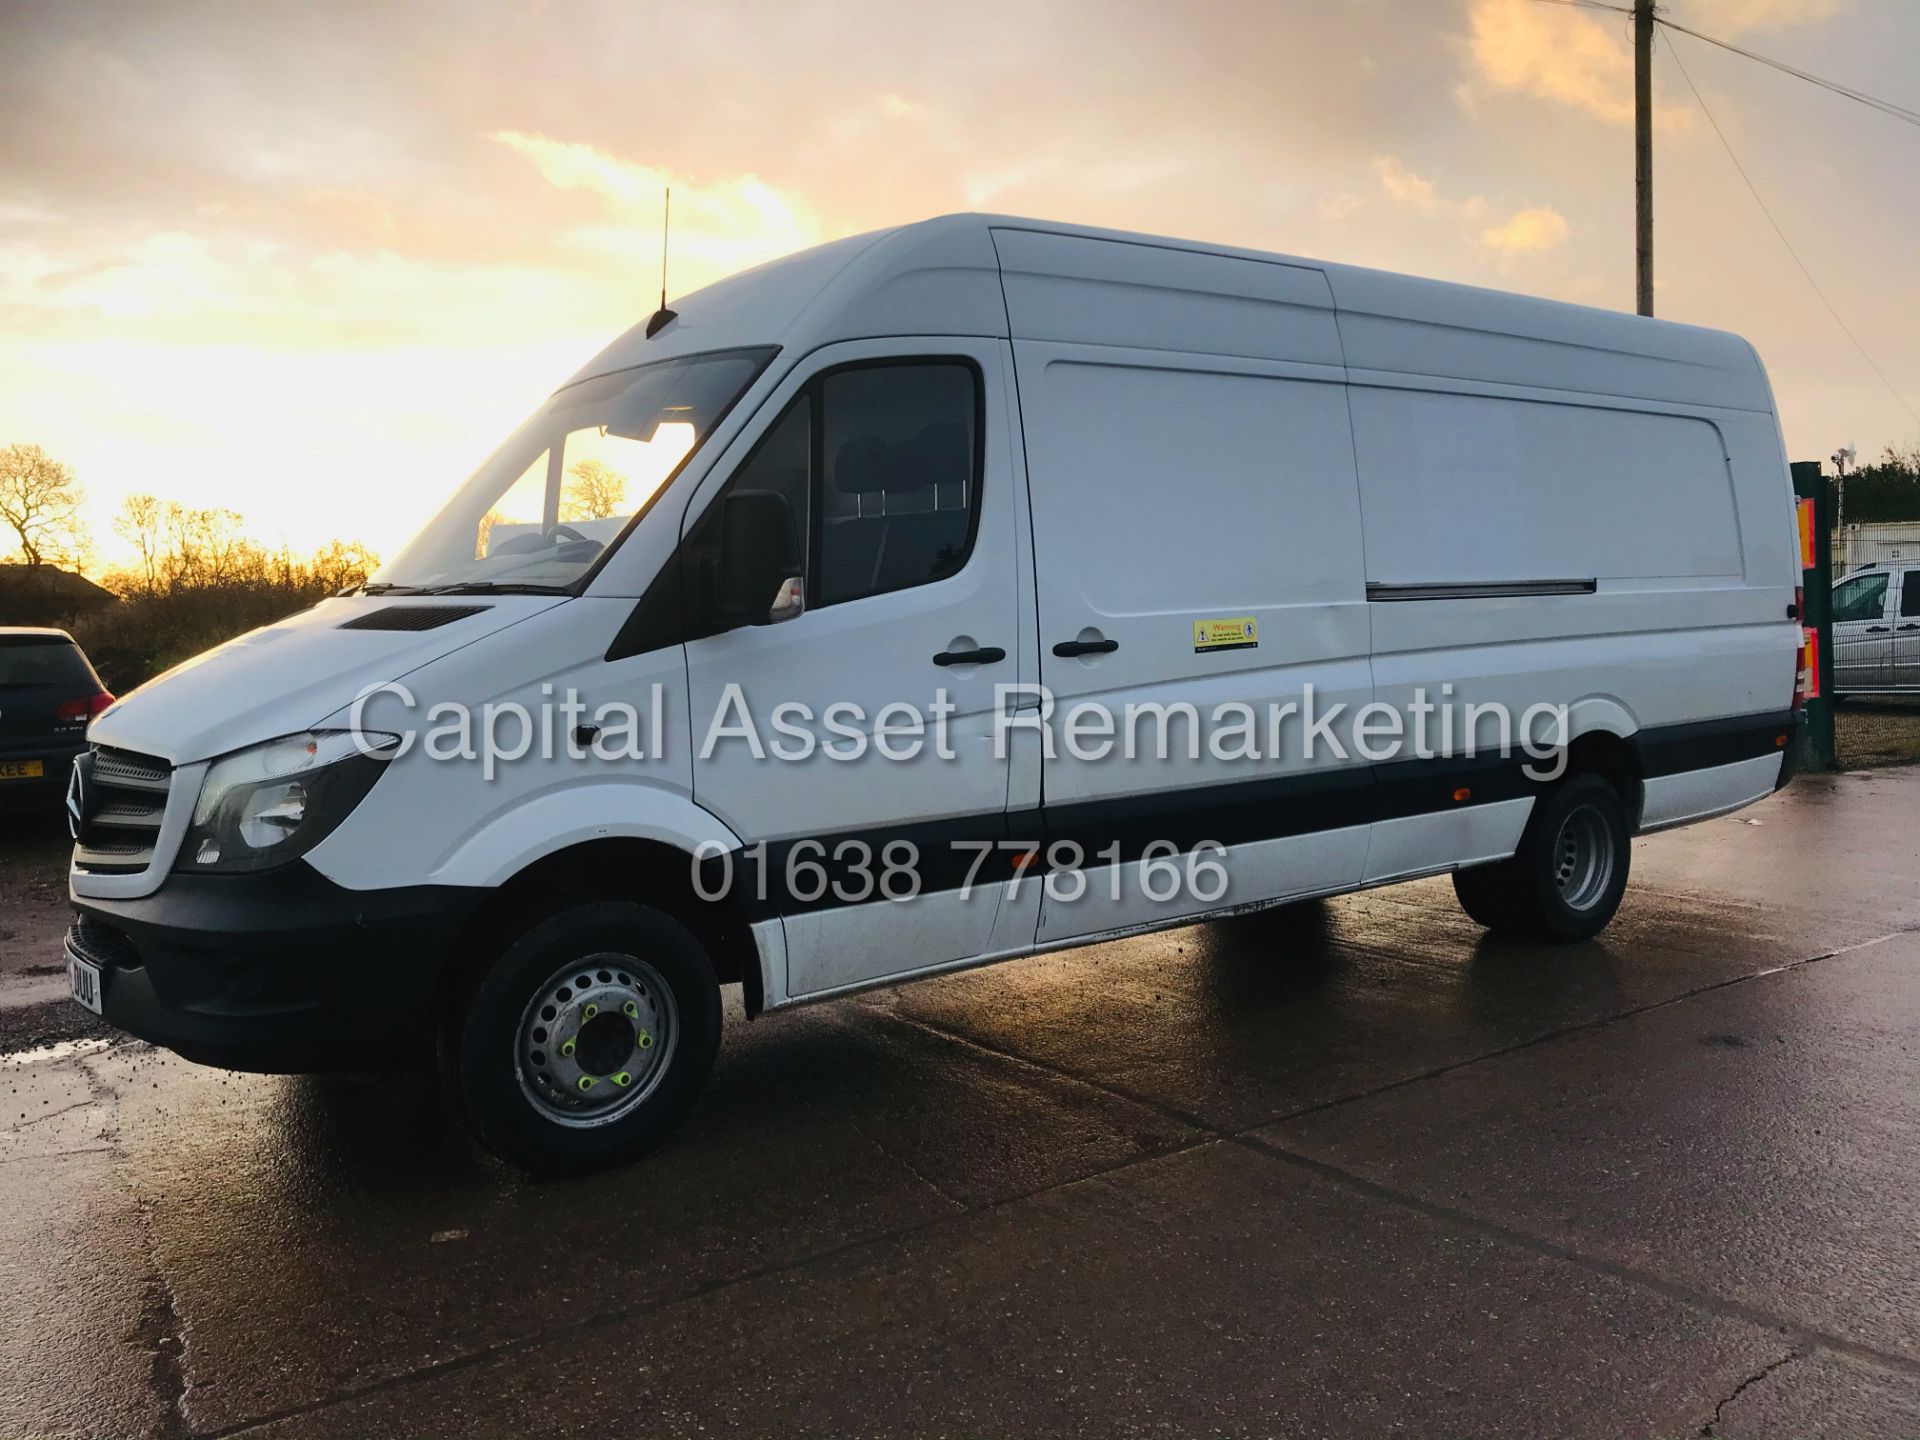 (On Sale) MERCEDES SPRINTER 513CDI "XLWB - TWIN REAR WHEELS" 1 OWNER (2015) *IDEAL CONVERSION* - Image 6 of 15